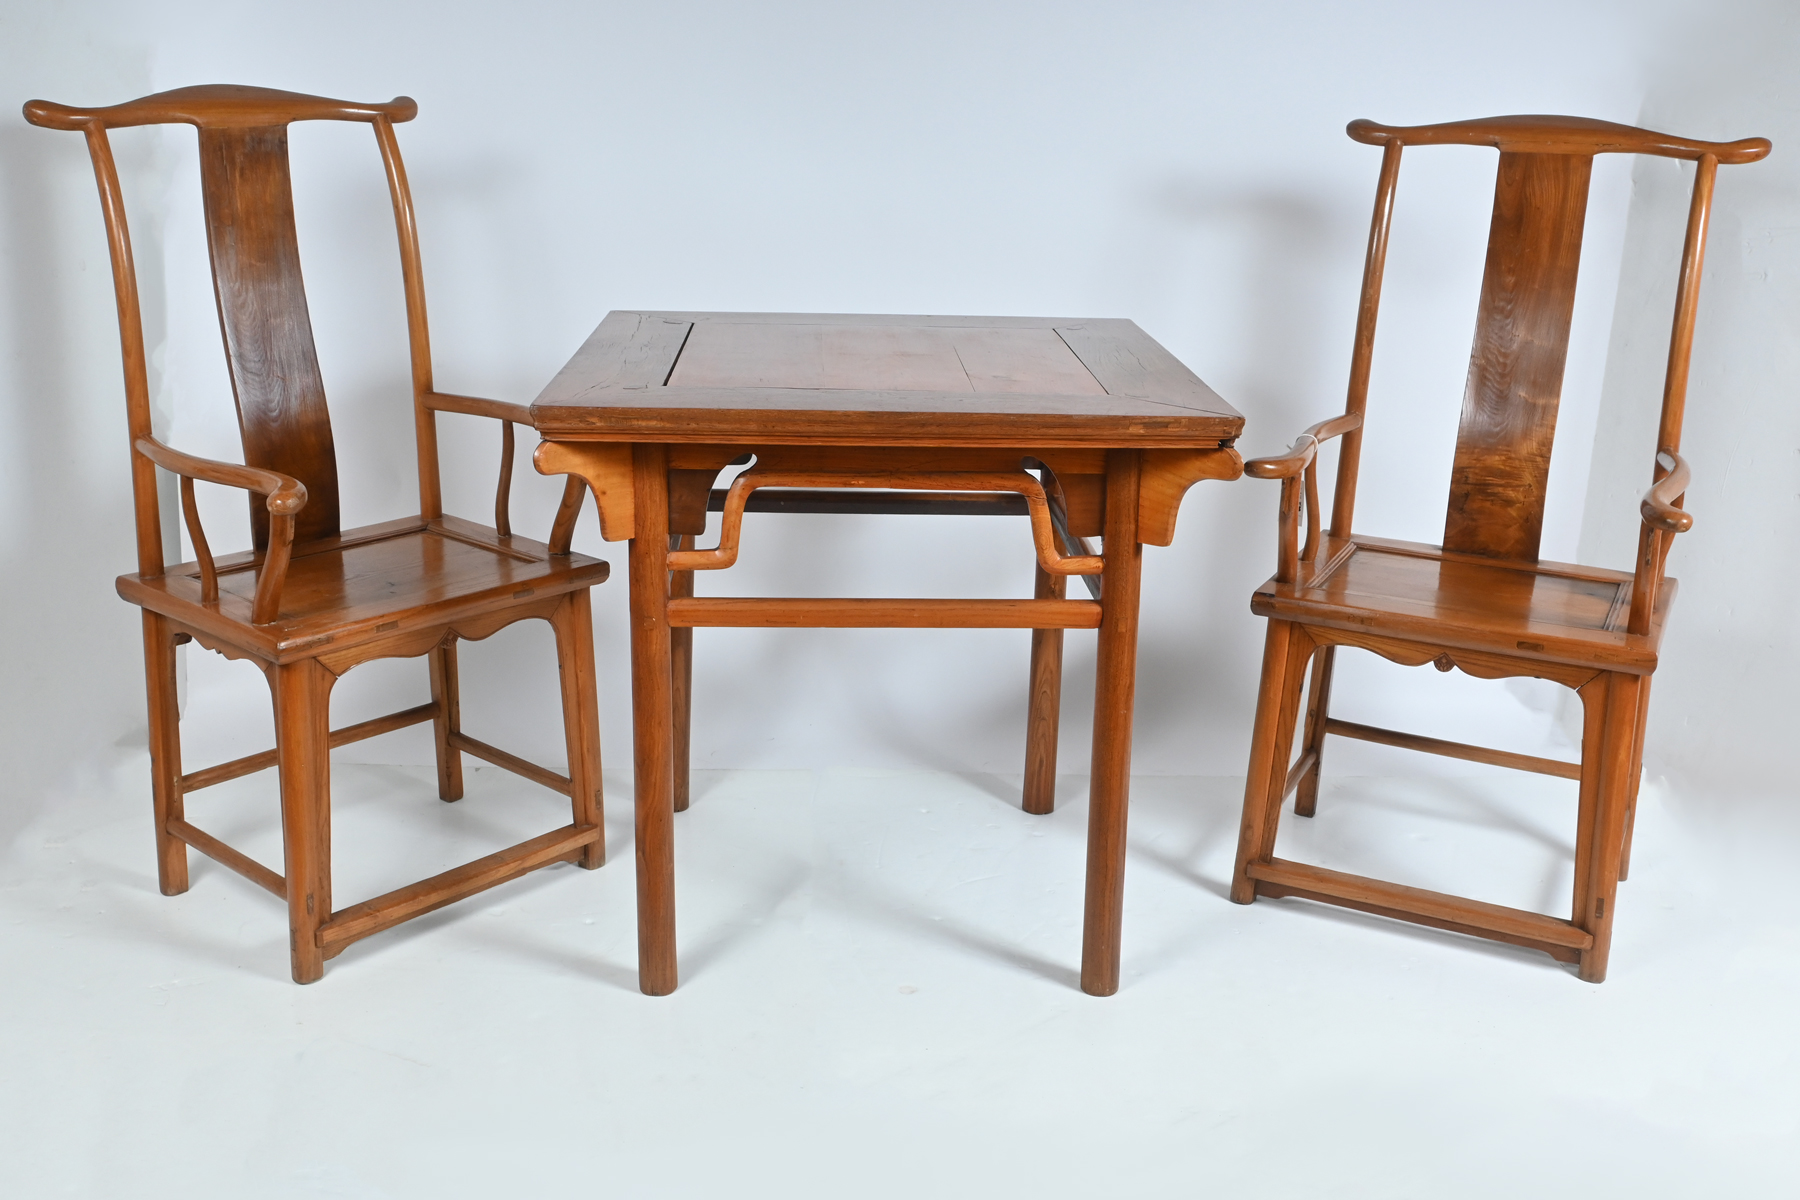 3 PC 19TH CENTURY CHINESE TABLE 369e2d